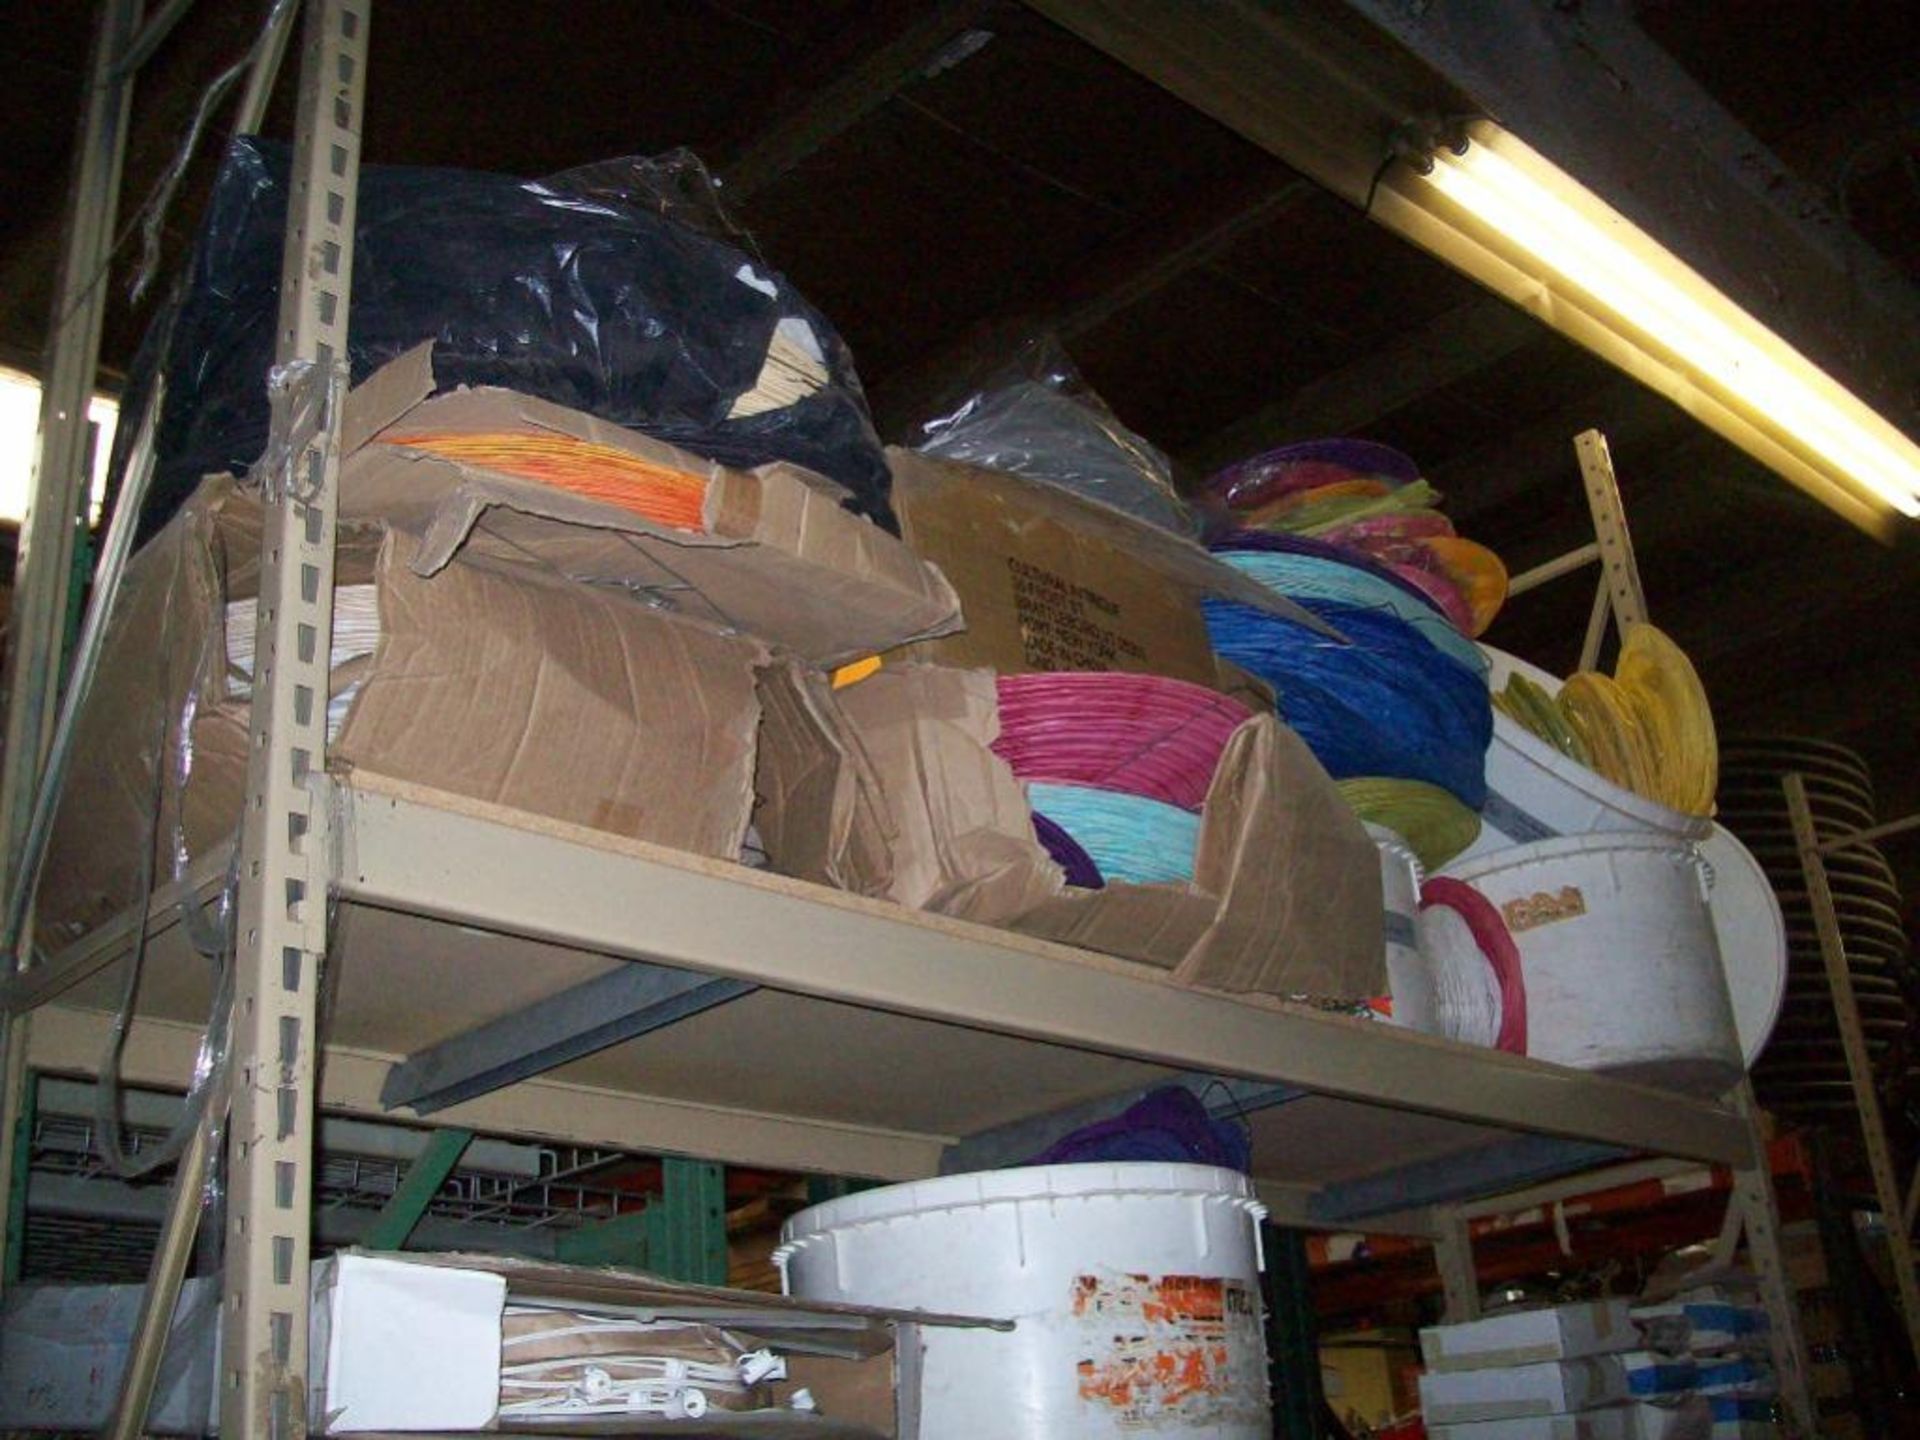 Lot of (300+/-) Chinese paper lanterns located top sections of pallet rack - Image 2 of 2